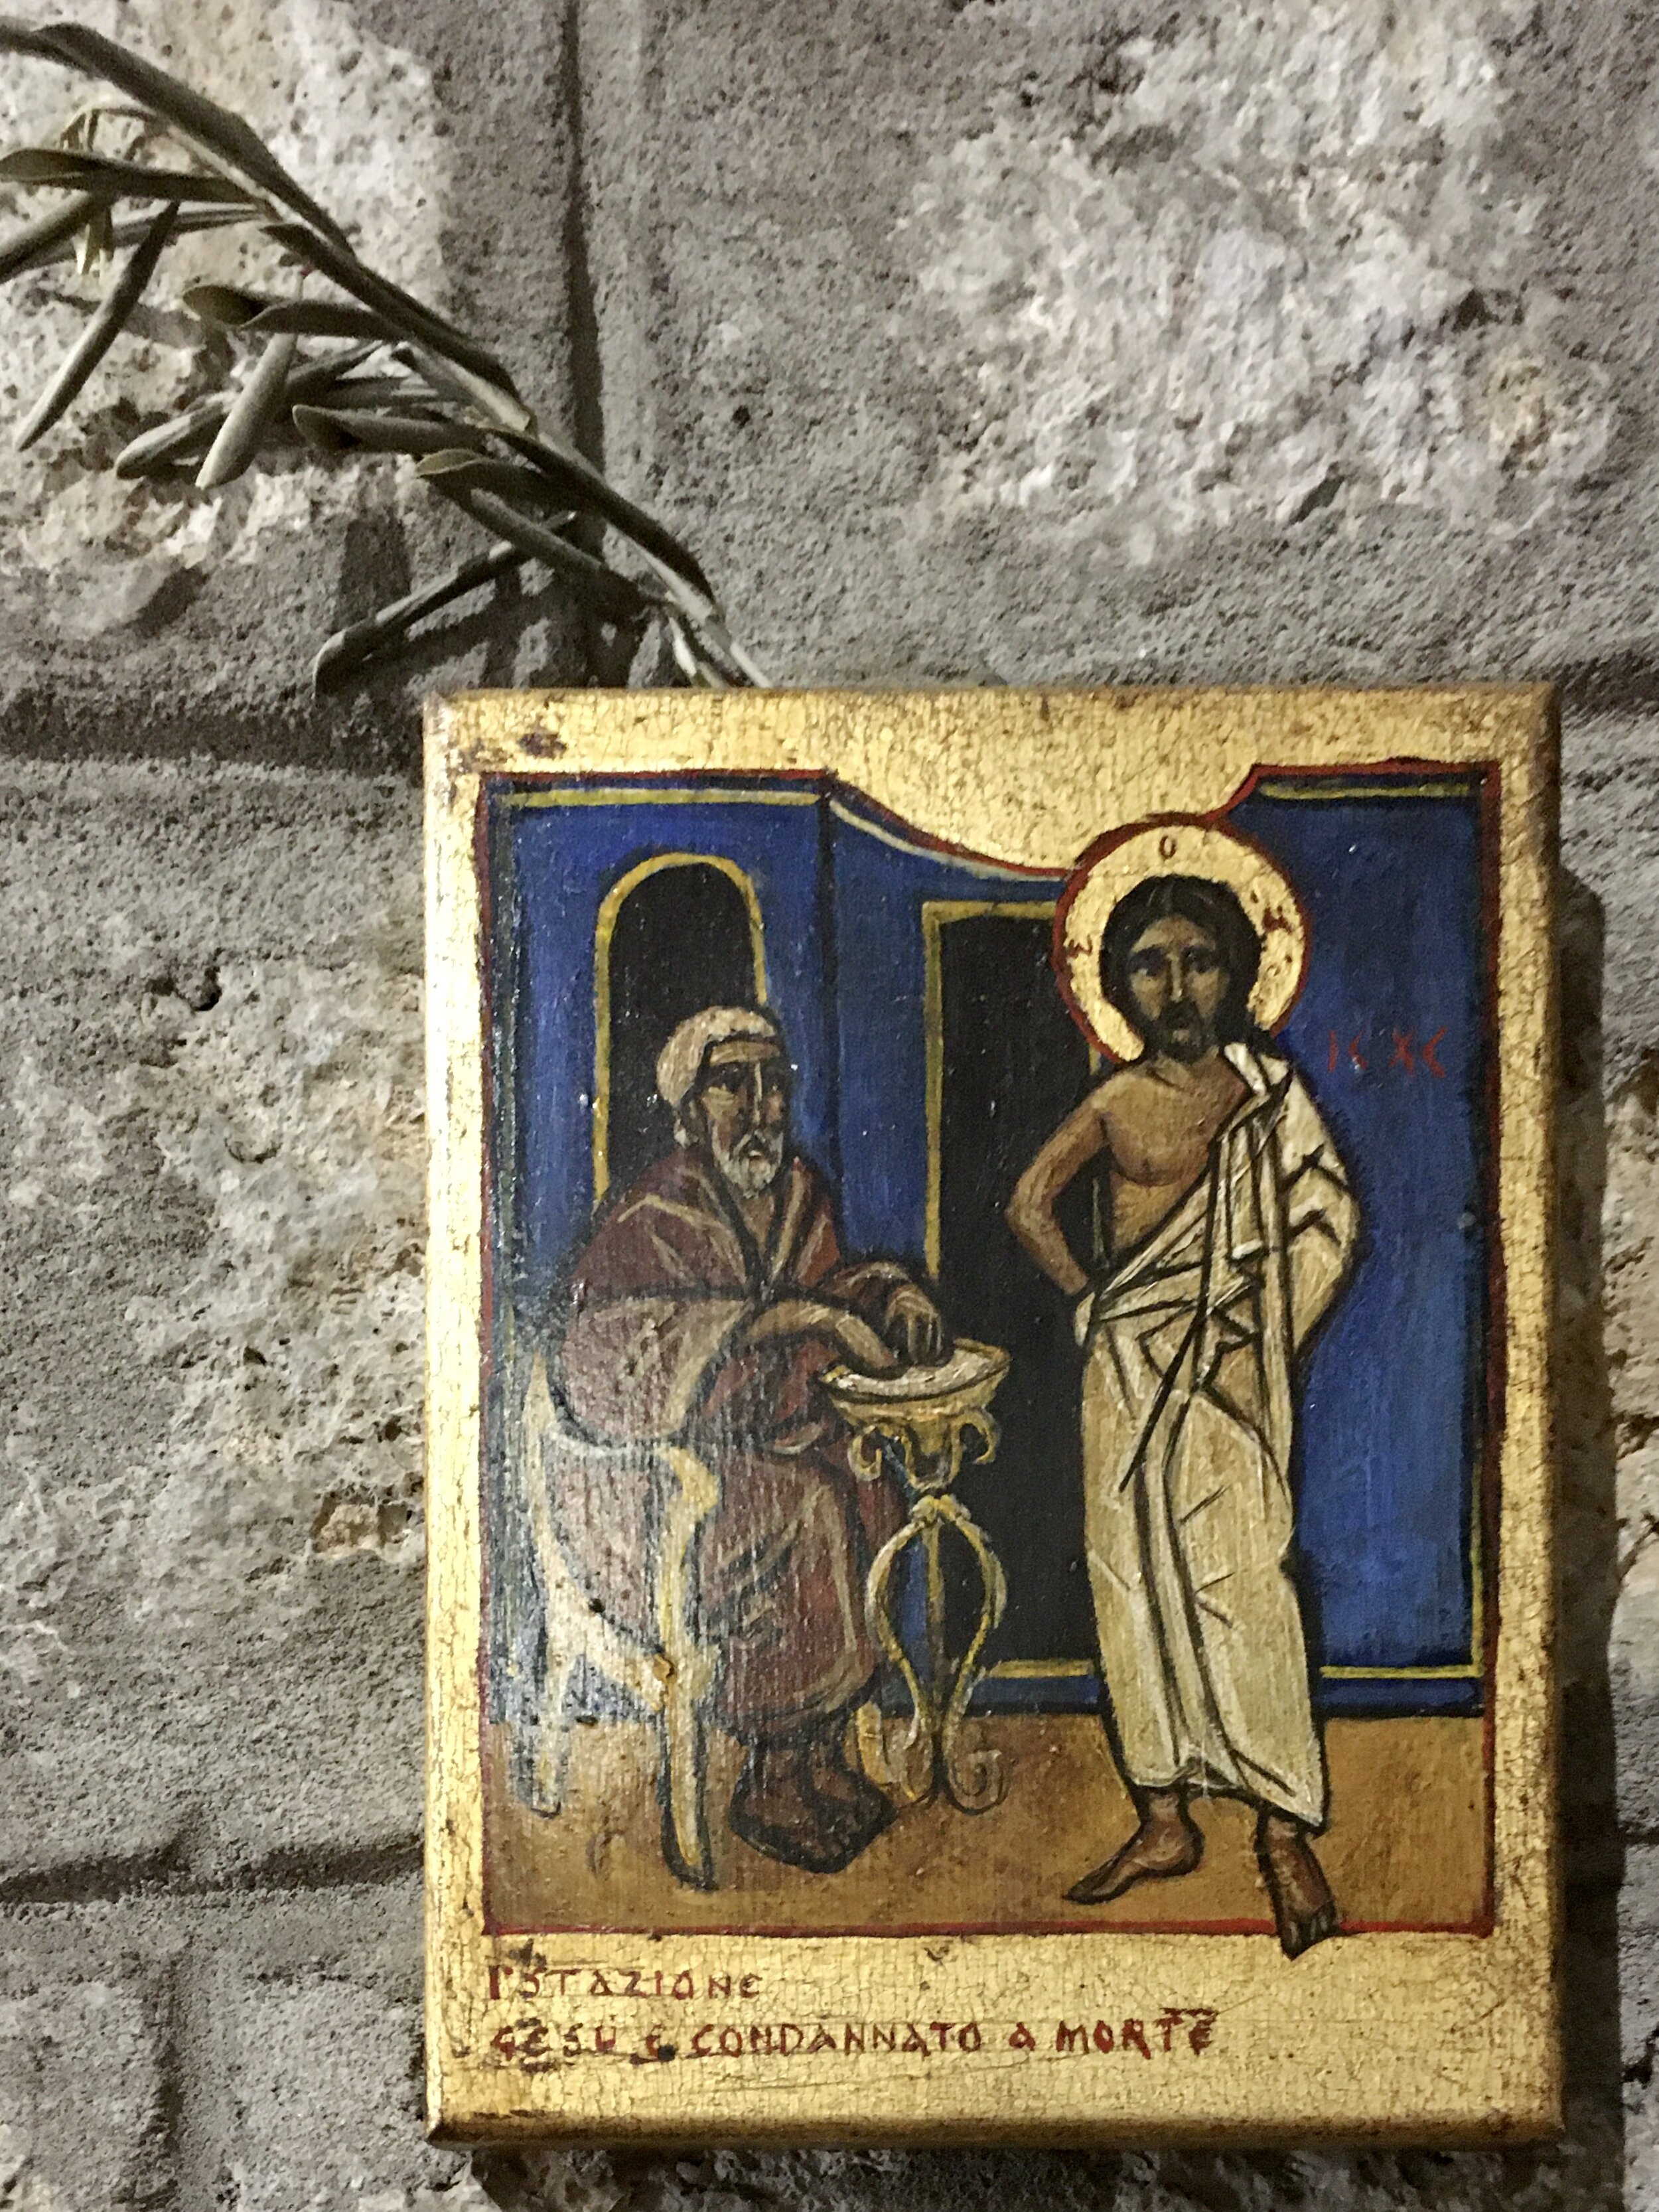 One of the Stations of the Cross in Chiesa di San Michele Arcangelo